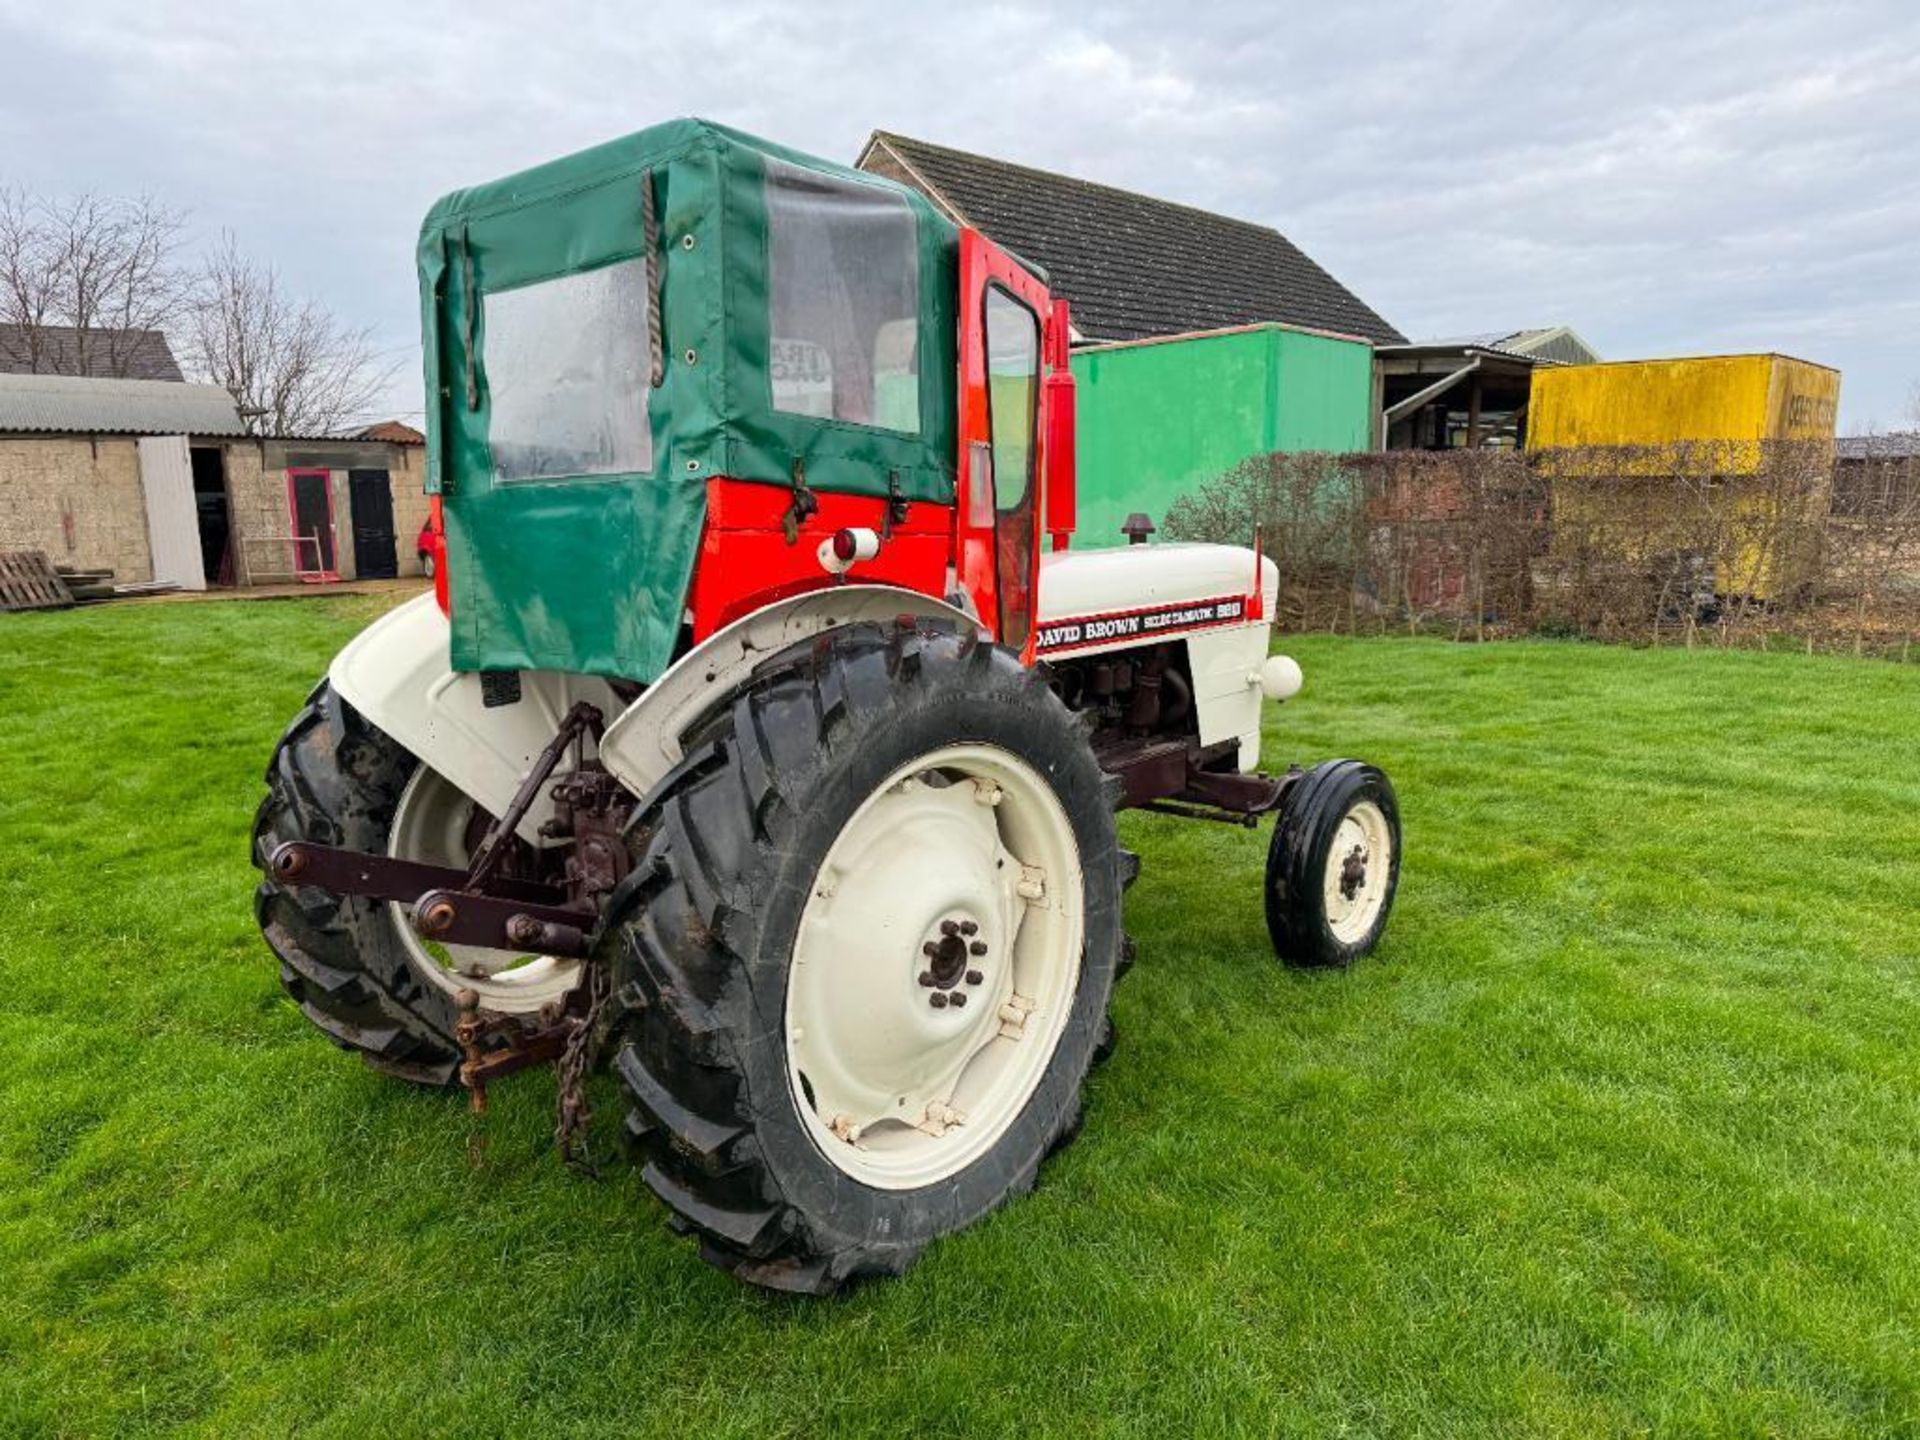 1968 David Brown 880 Selectamatic 2wd diesel tractor with canvas cab, rear hydraulic valve, PTO, rea - Image 10 of 19